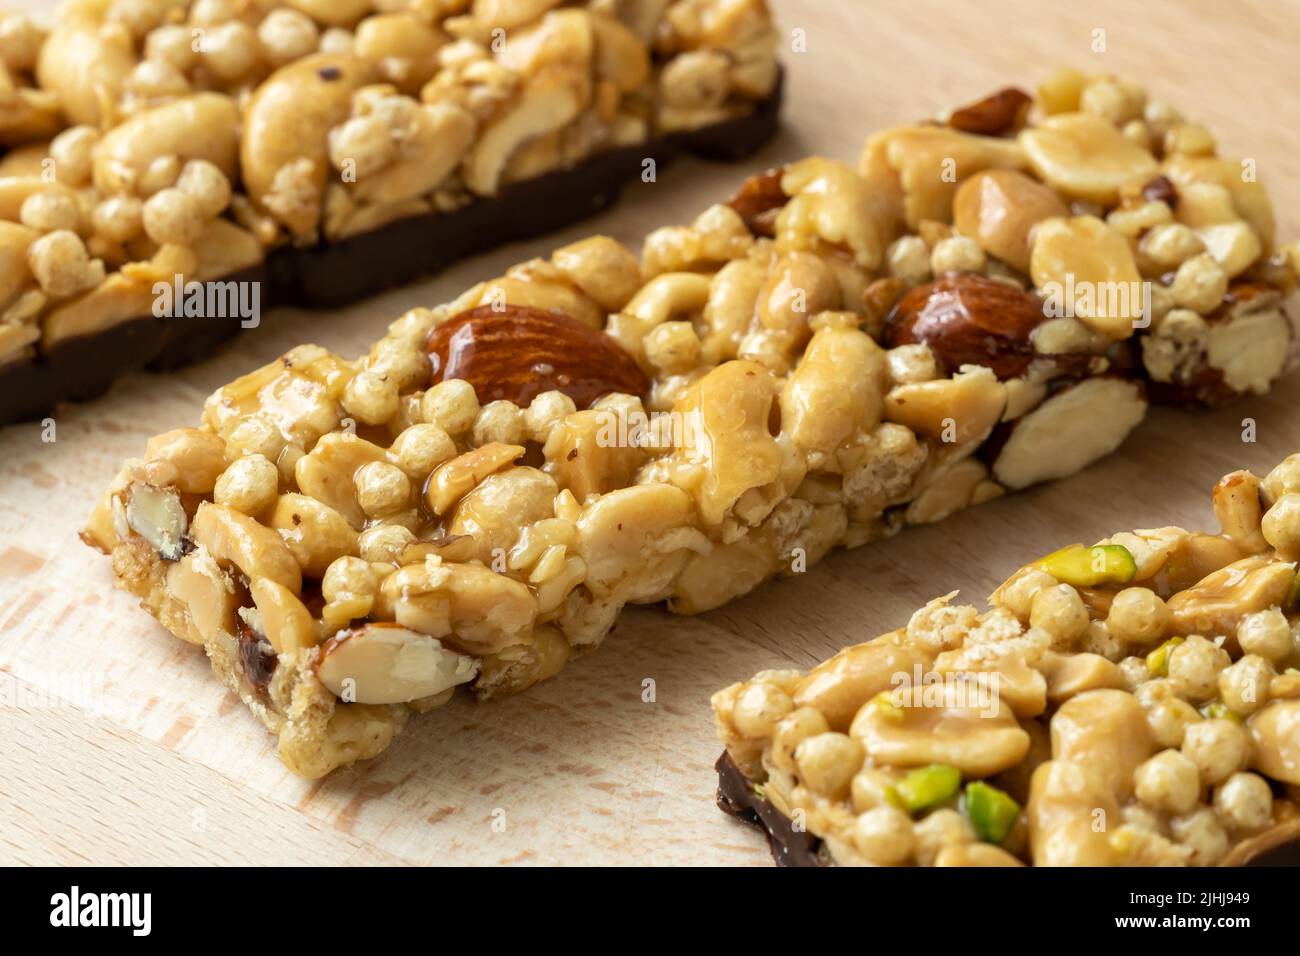 Cereal superfood energy bars with almond nuts, dry fruits, raisins chocolate on the wood table Stock Photo